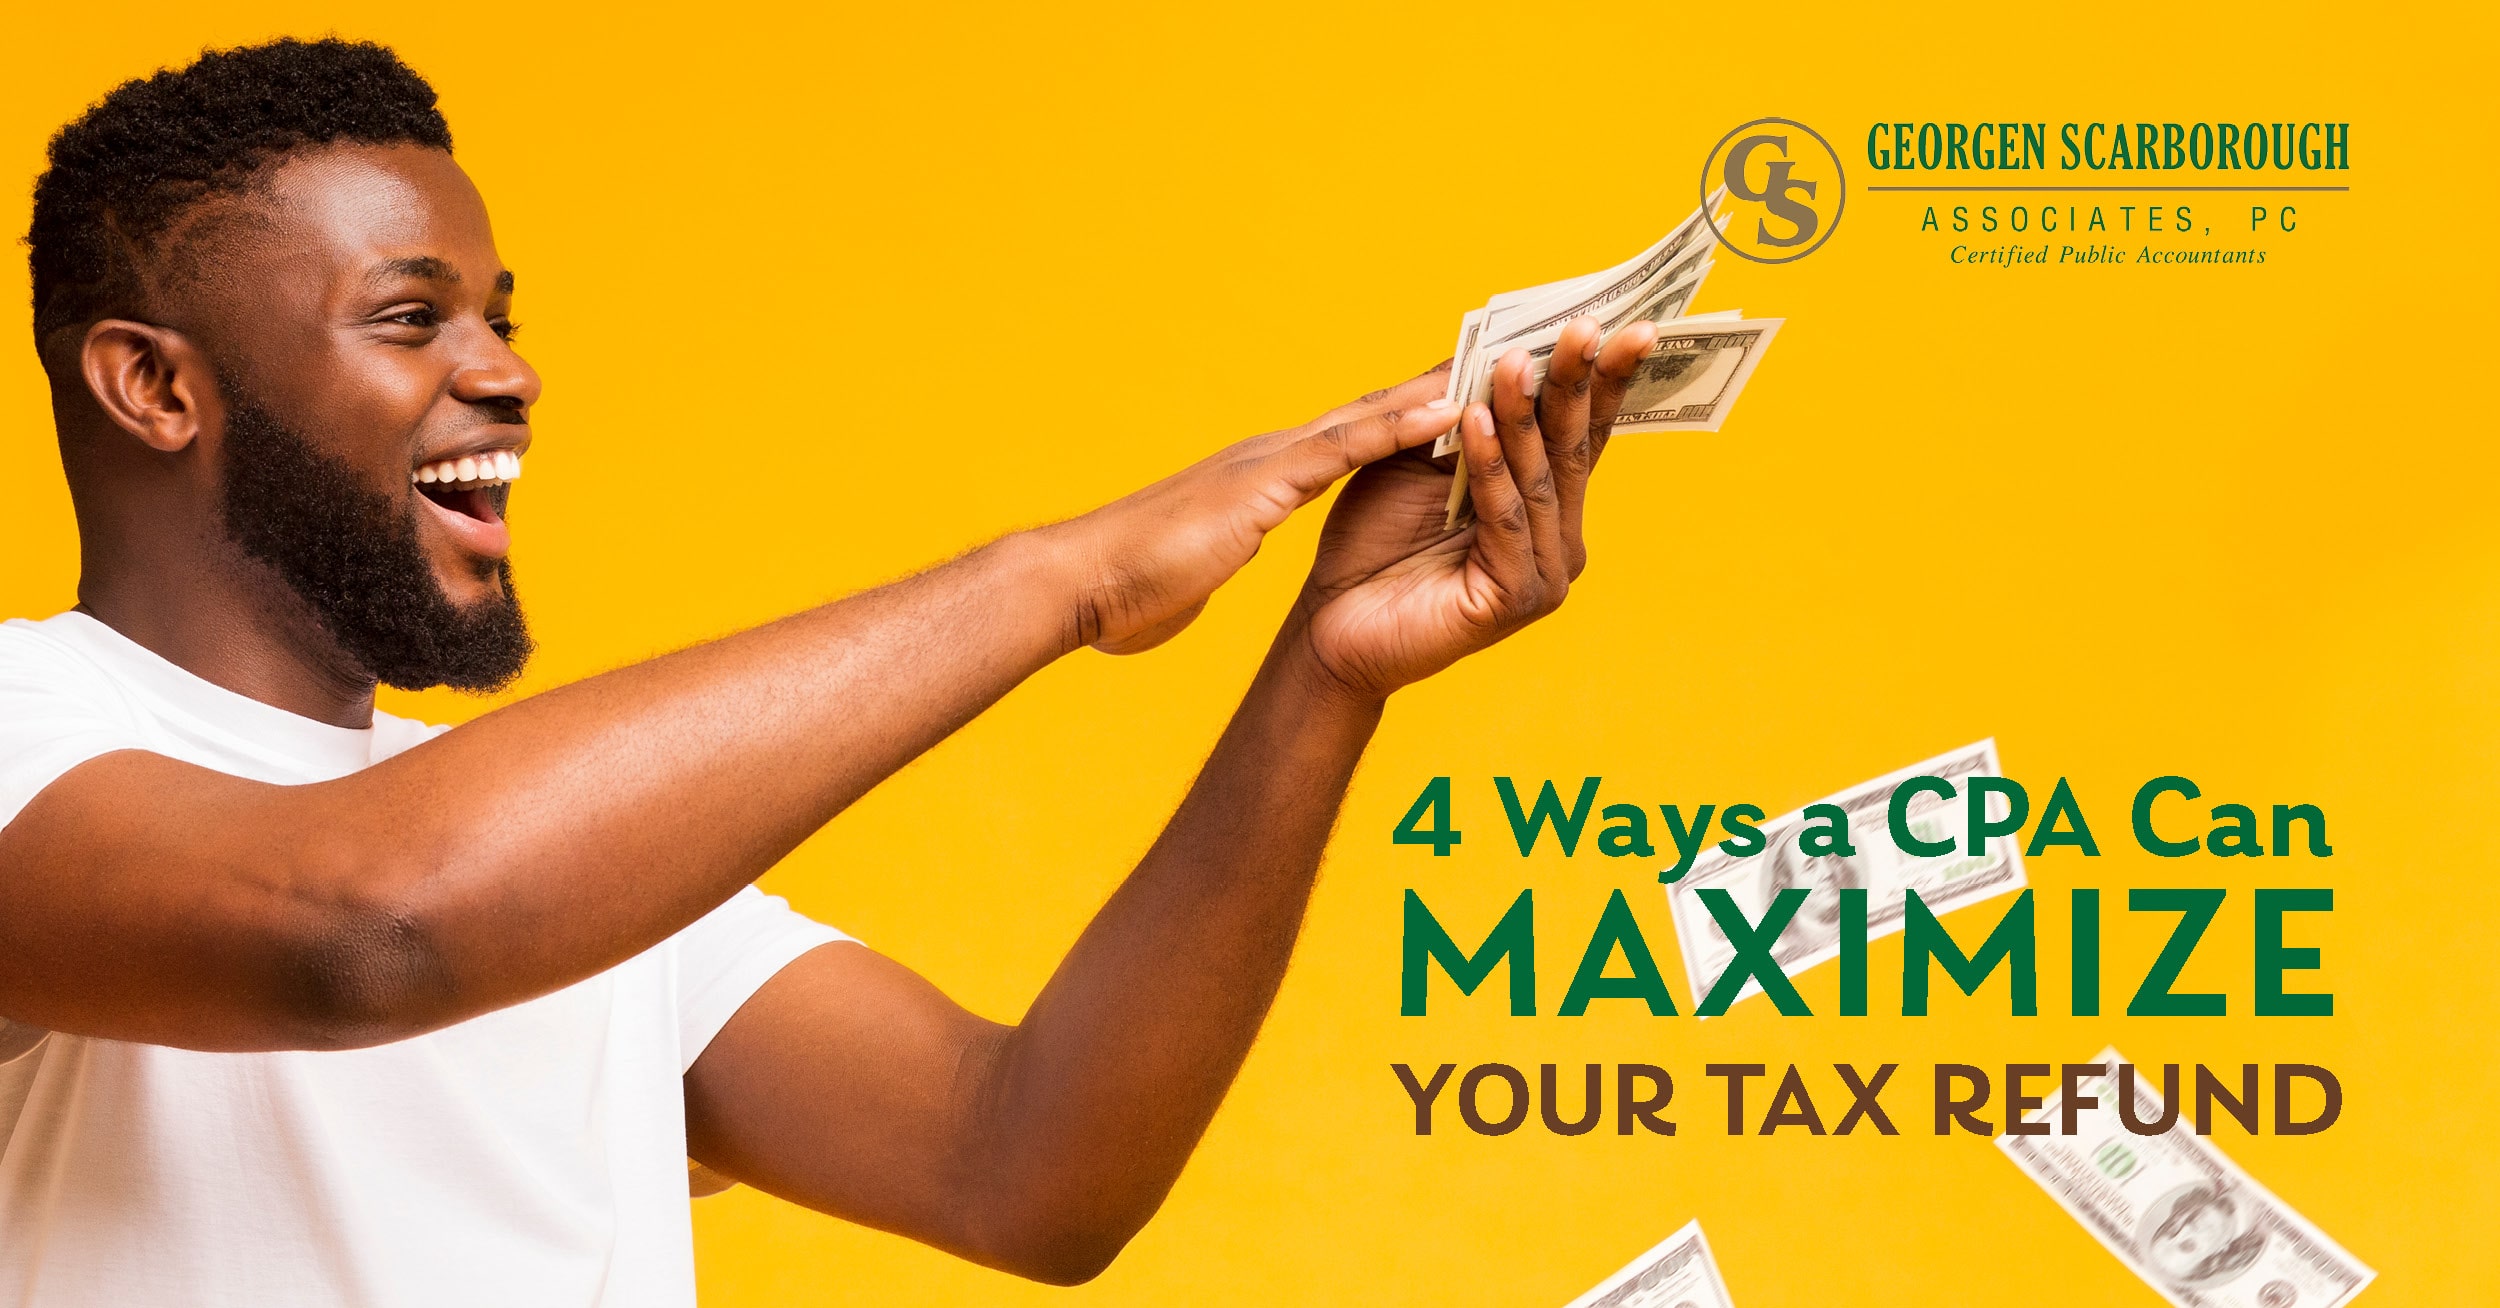 4 Ways to Maximize Your Tax Refund with a CPA.